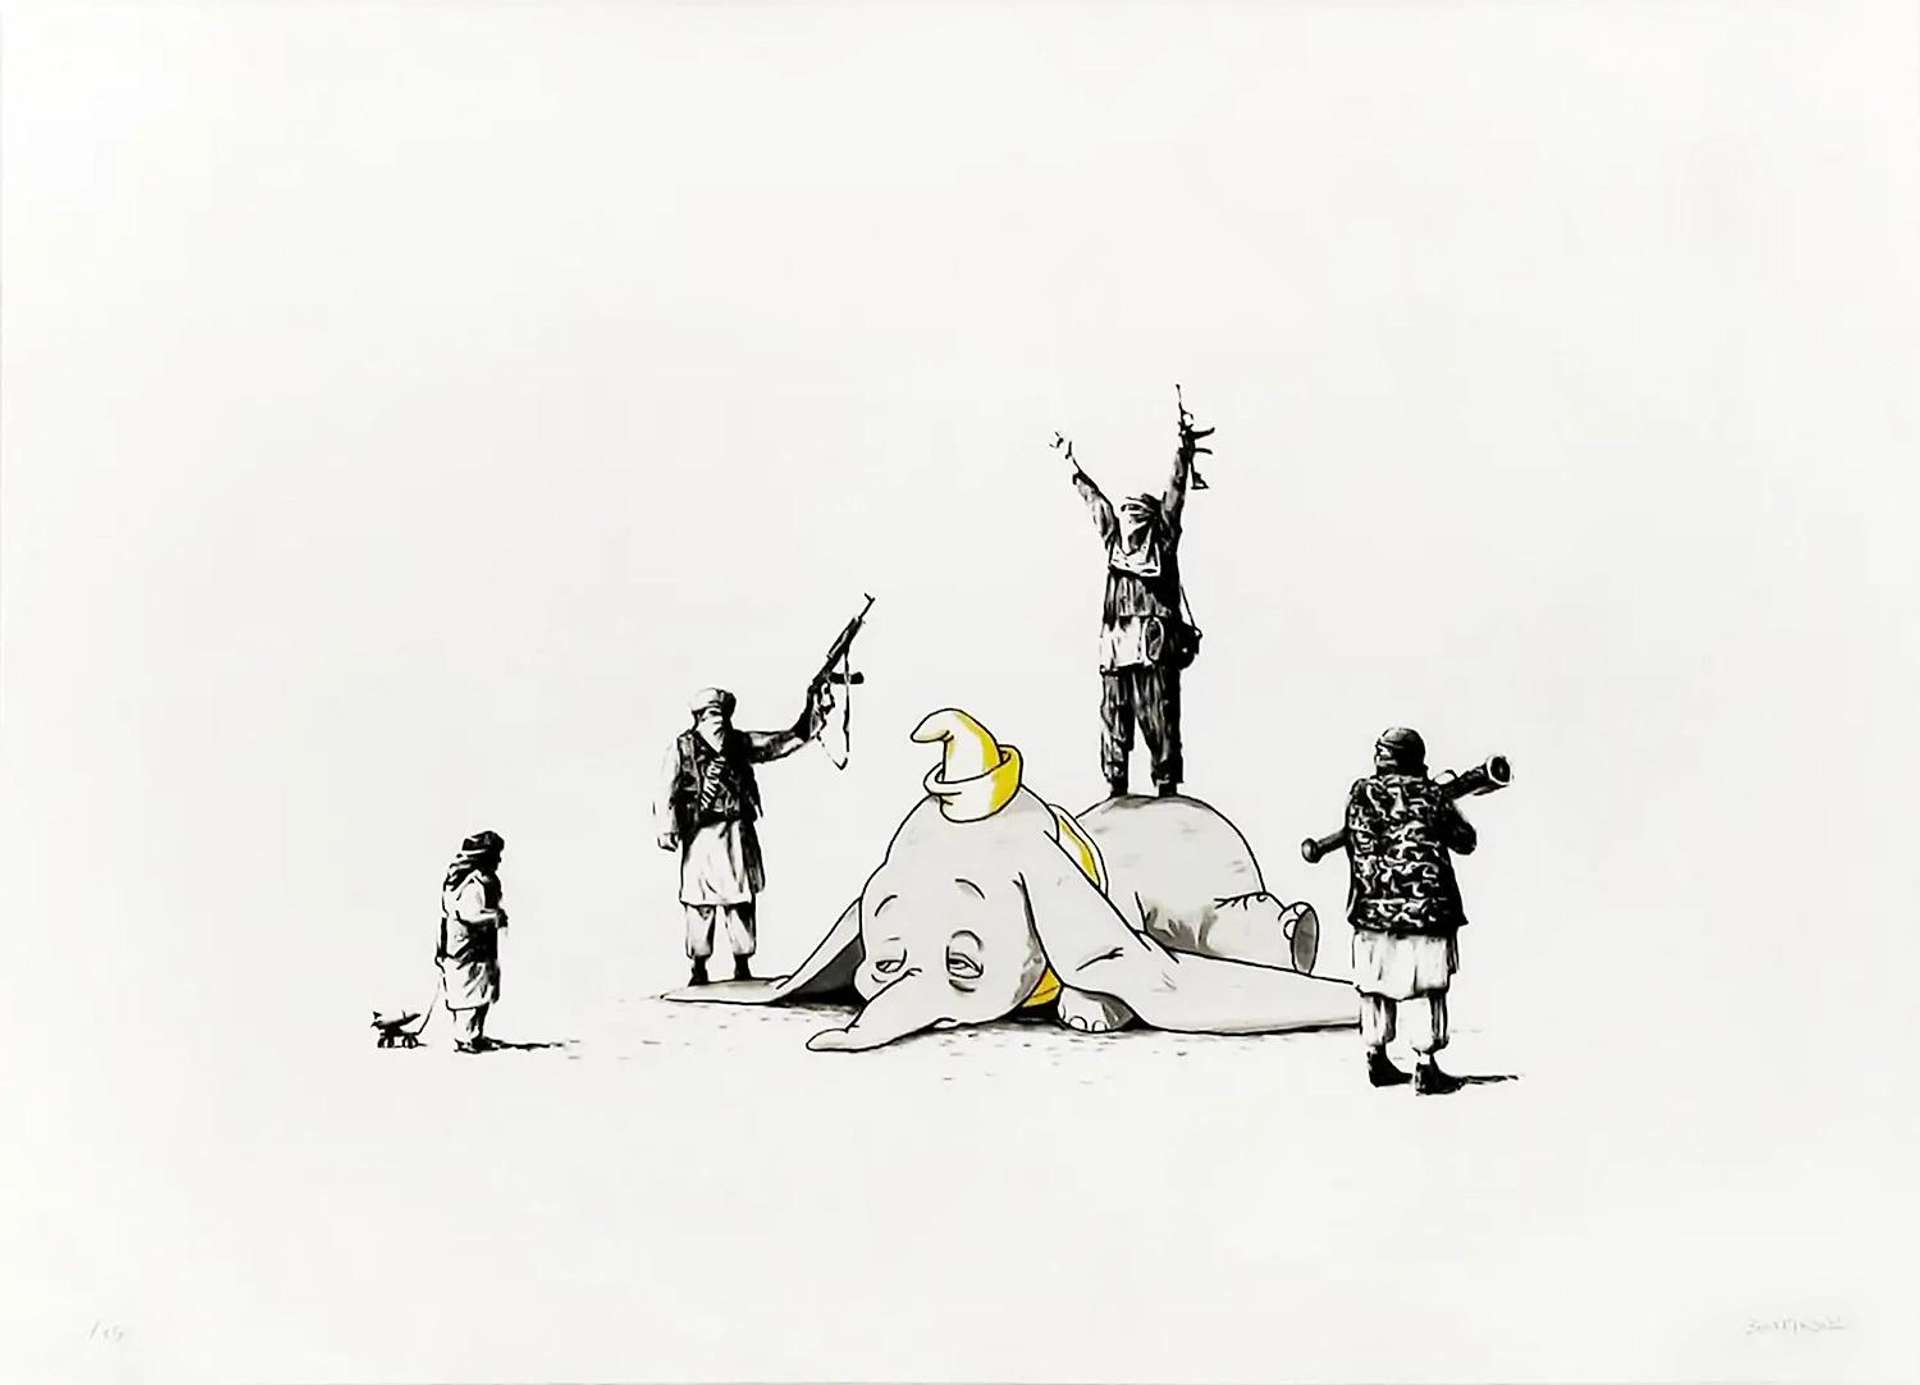 A screenprint by Banksy depicting rebel militants standing atop a flying elephant, celebrating their ‘prize’ with weapons pointed skywards.